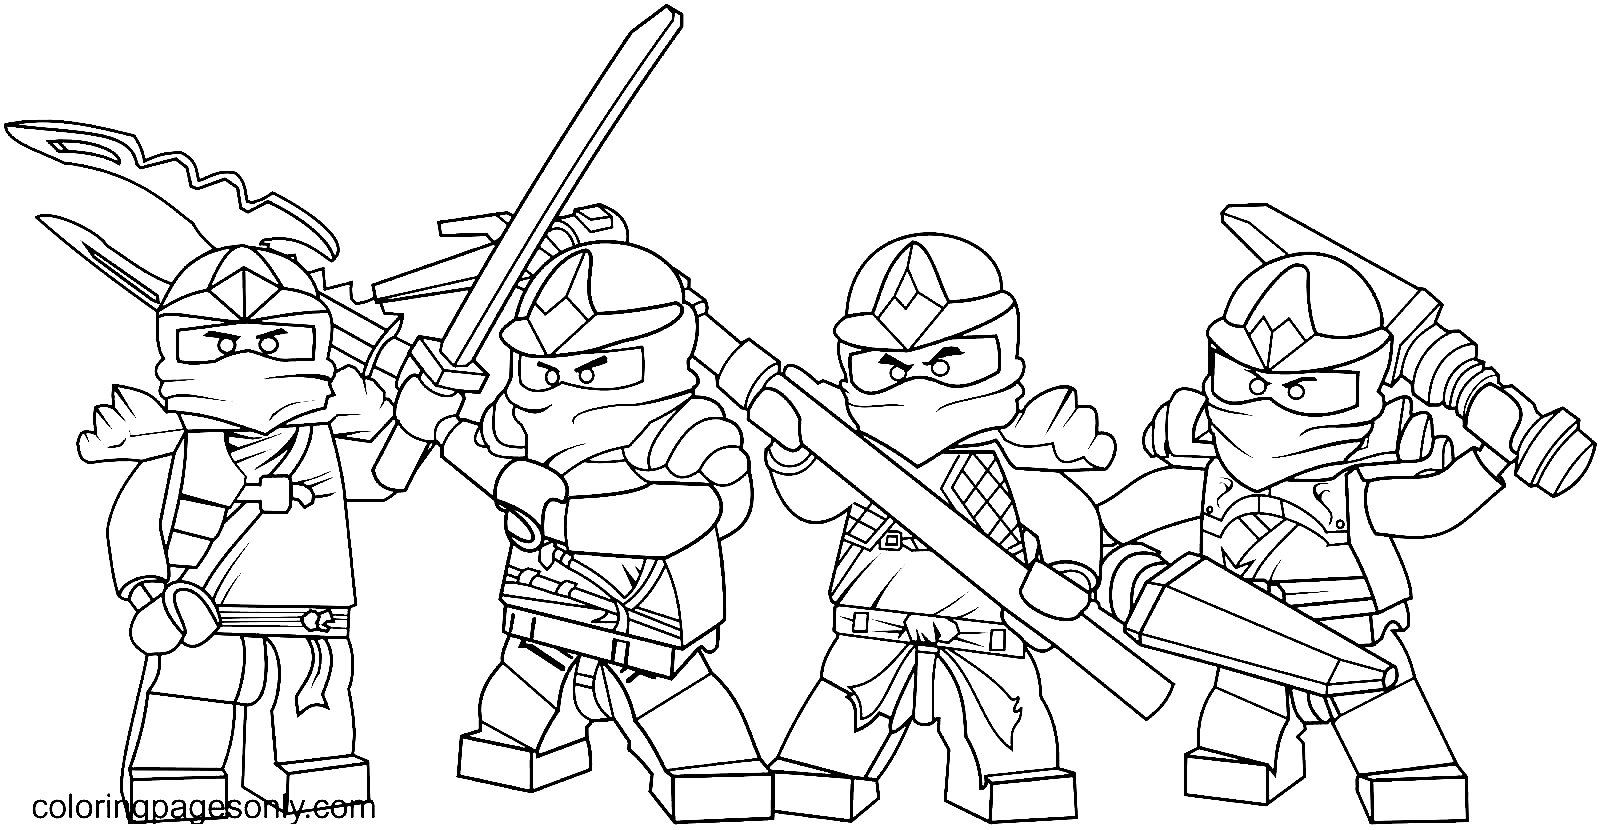 Lego Ninja Fighting Coloring Pages   Ninja Coloring Pages ...